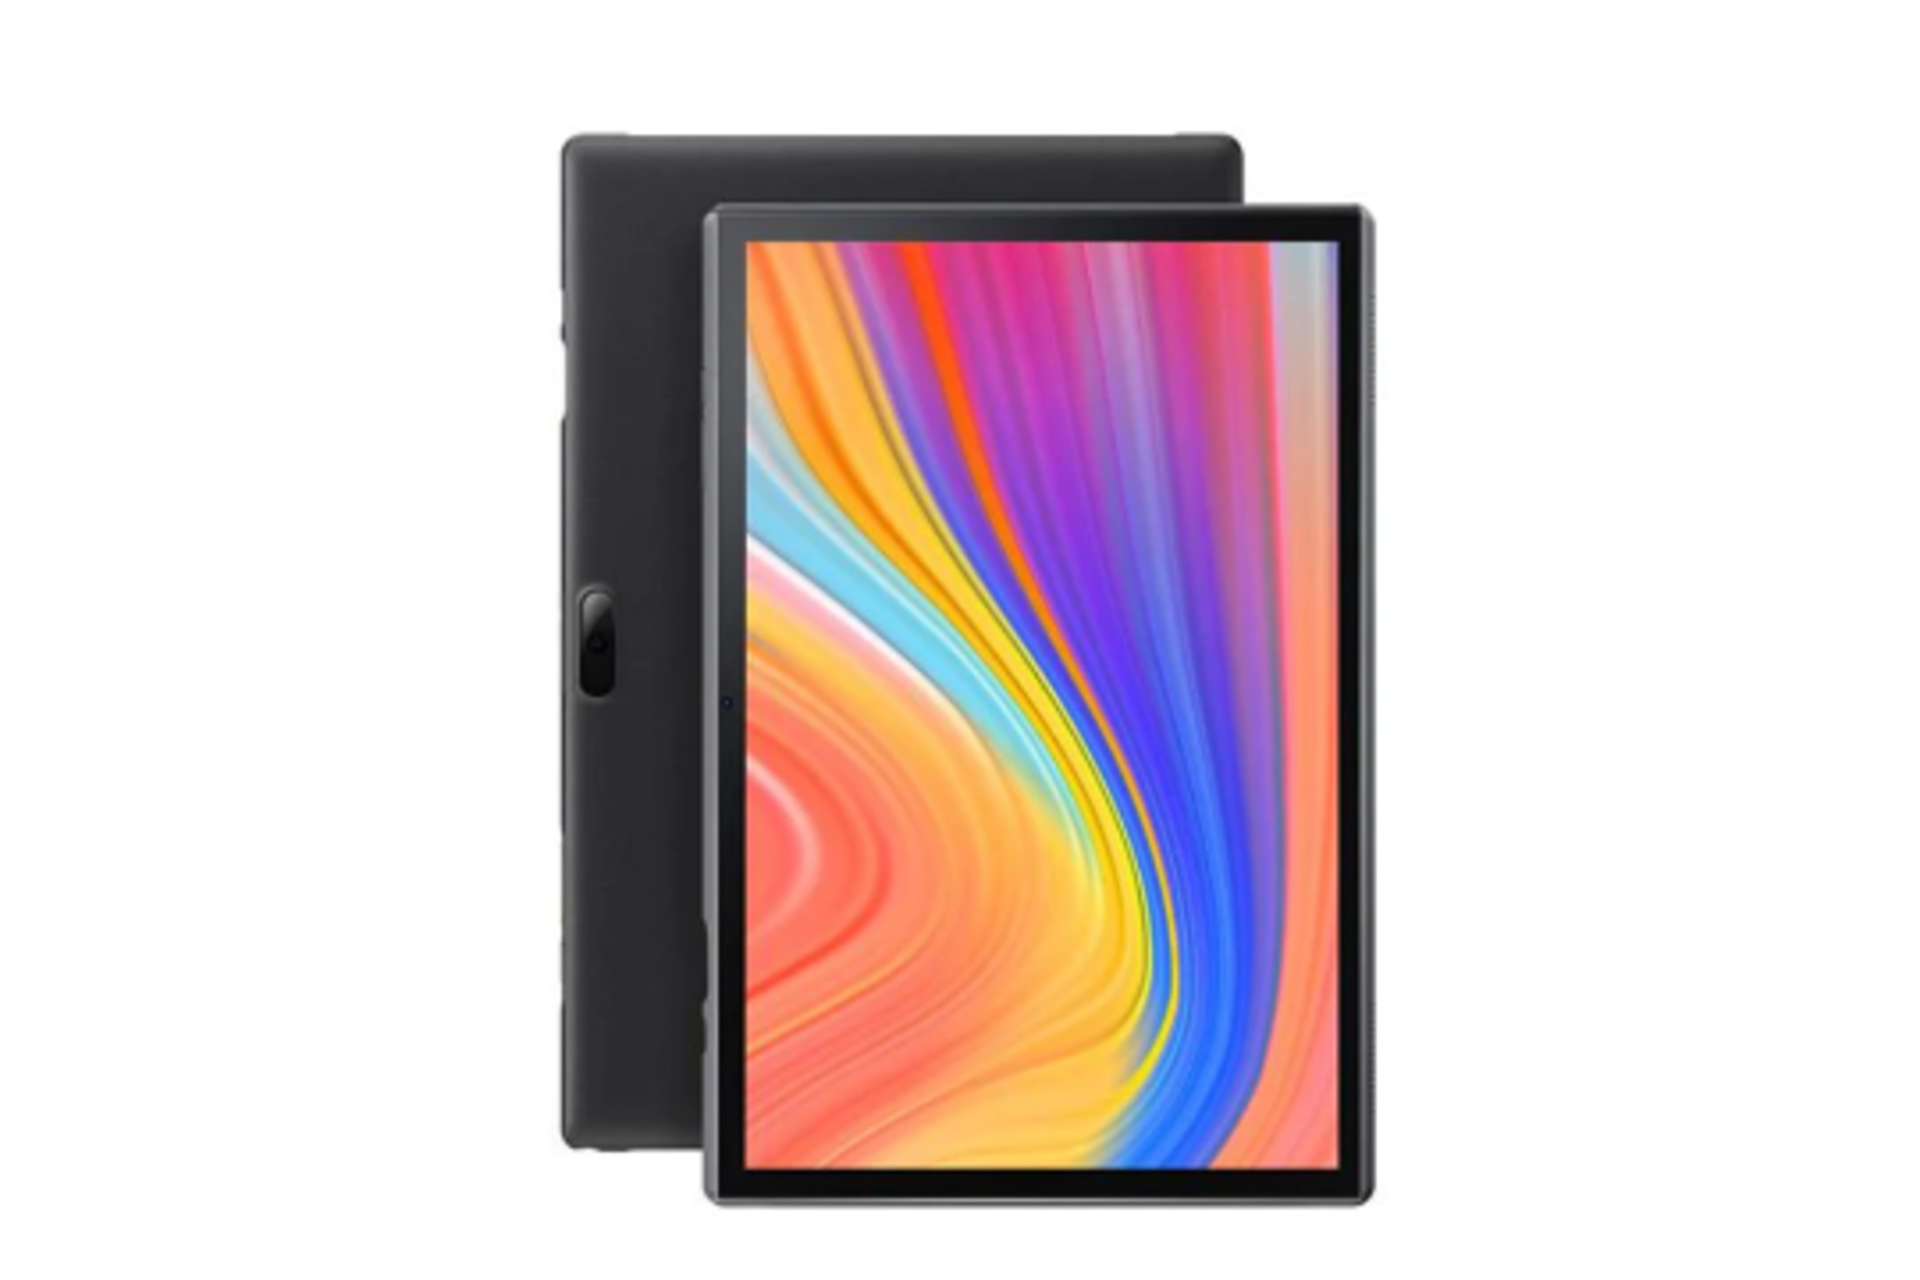 New Boxed VANKYO MatrixPad S10 10 inch Android Tablet, Quad-Core Processor, IPS HD Display, Slate